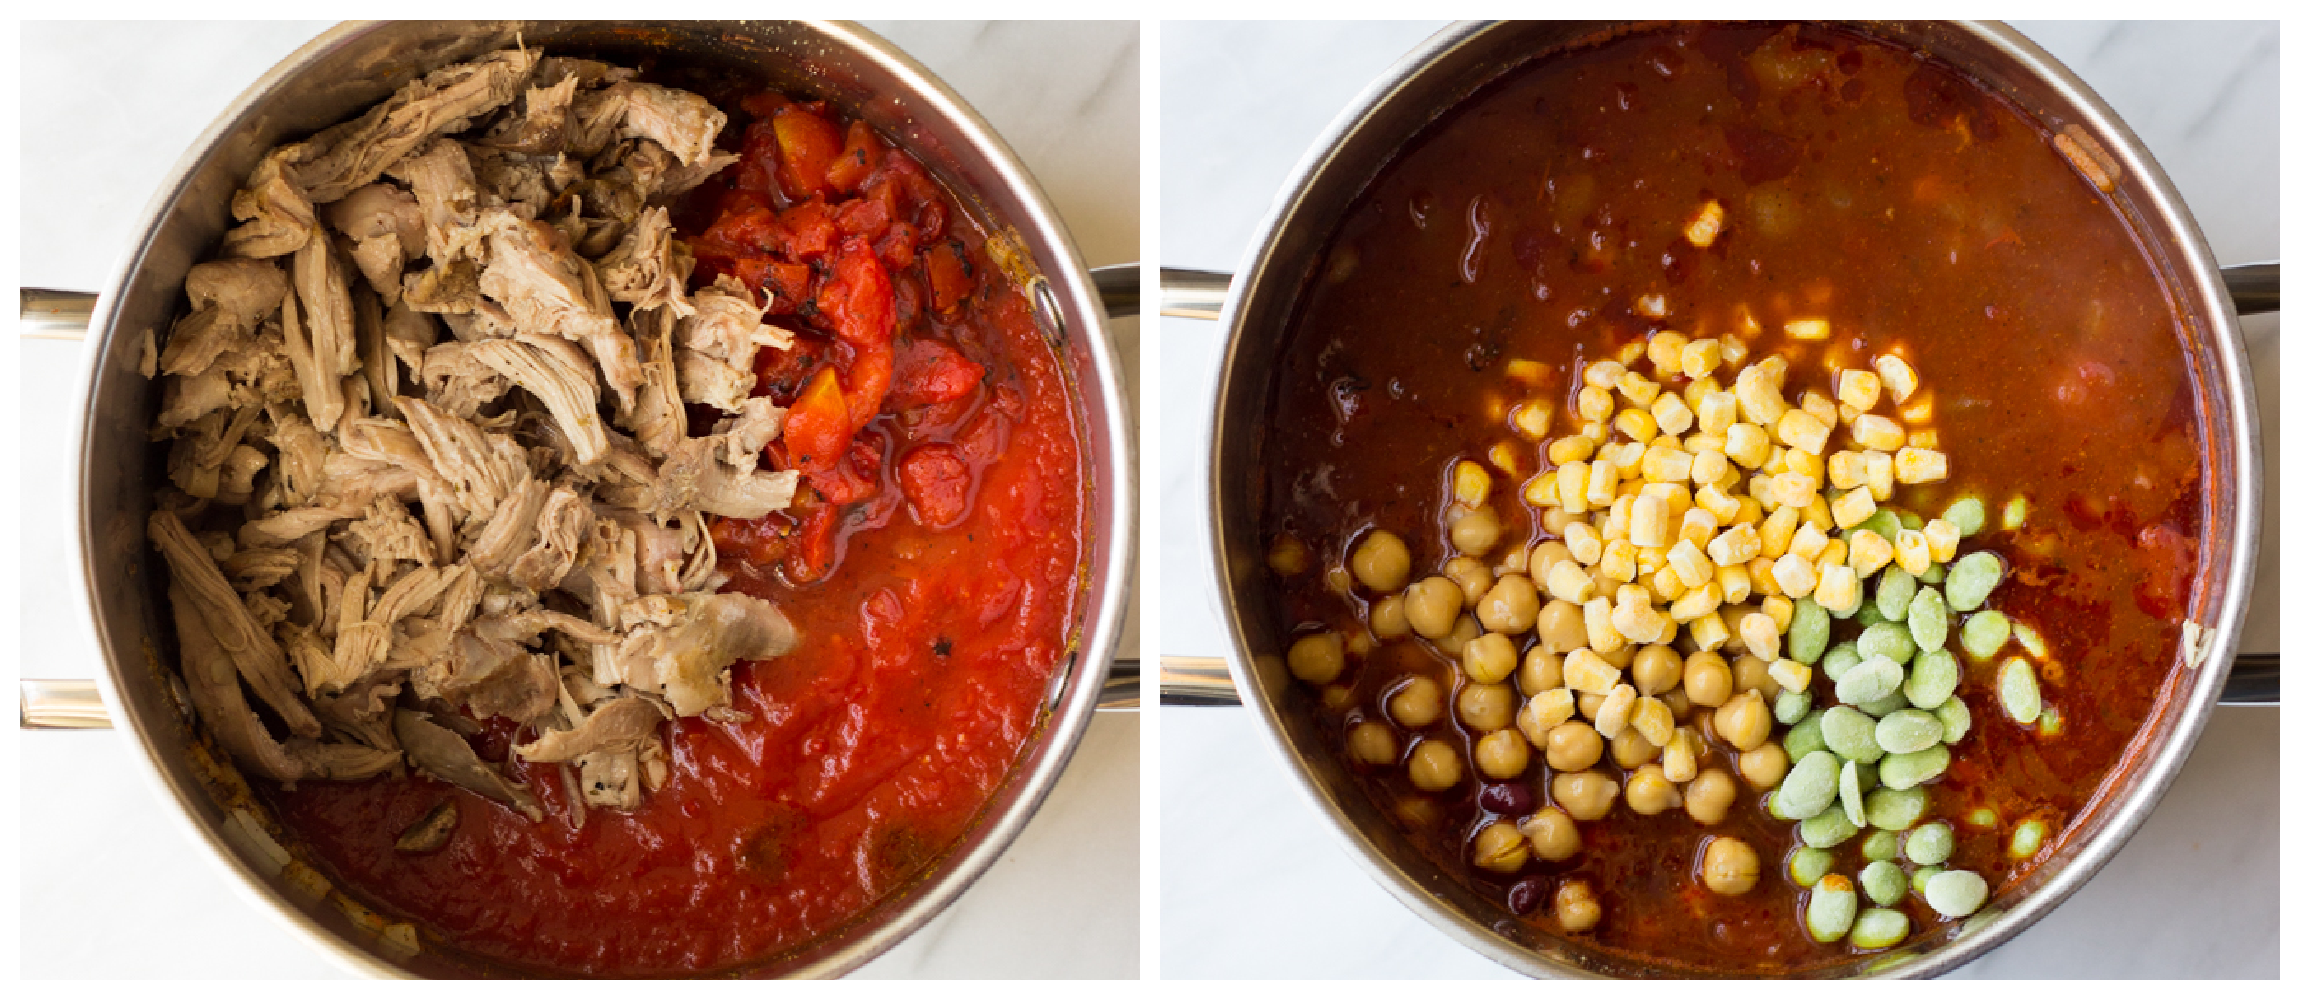 two soup pot photos showing cut up veggies with tomatoes in one, and corn and edamame in second.